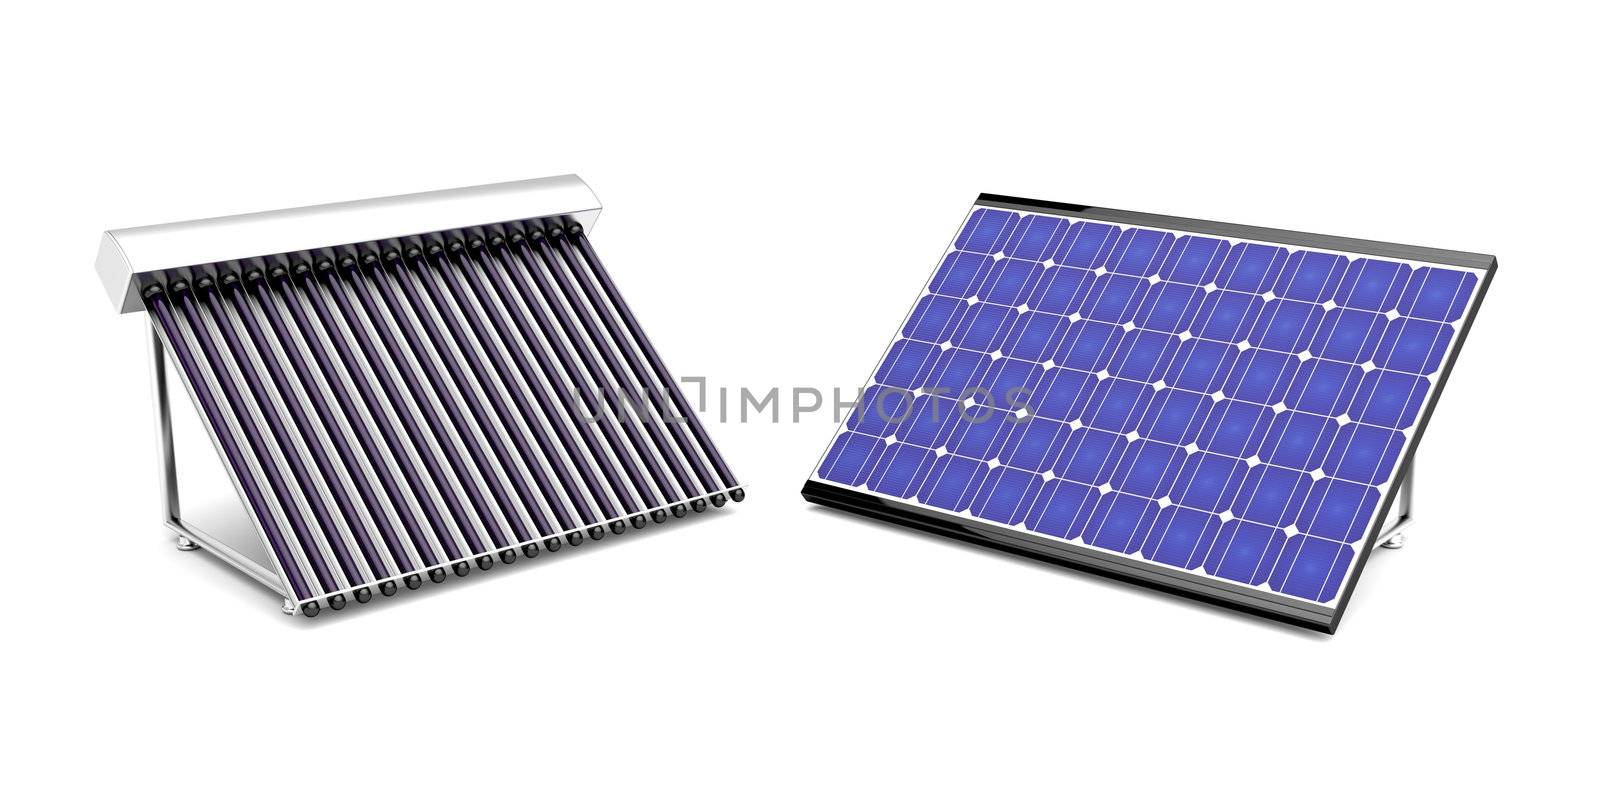 Solar water heater and solar panel for electricity